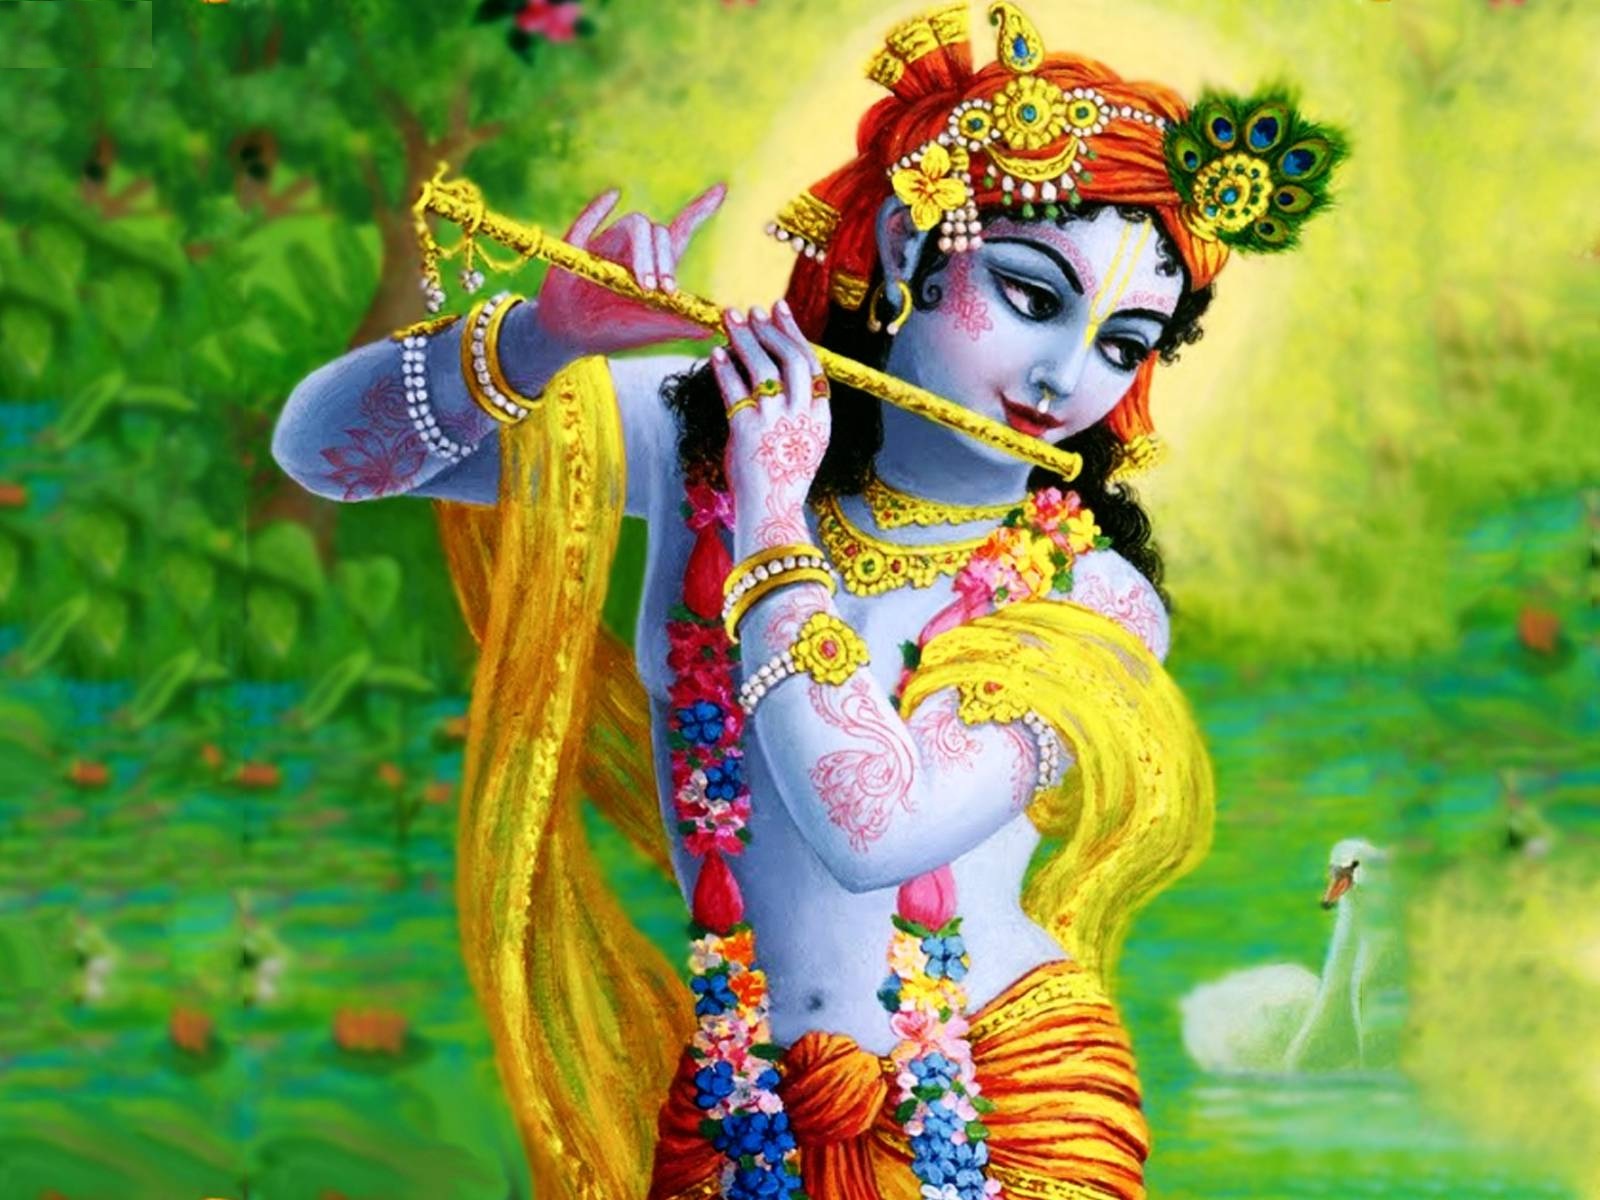 Lord Krishna playing flute paintings wallpapers - New hd ...